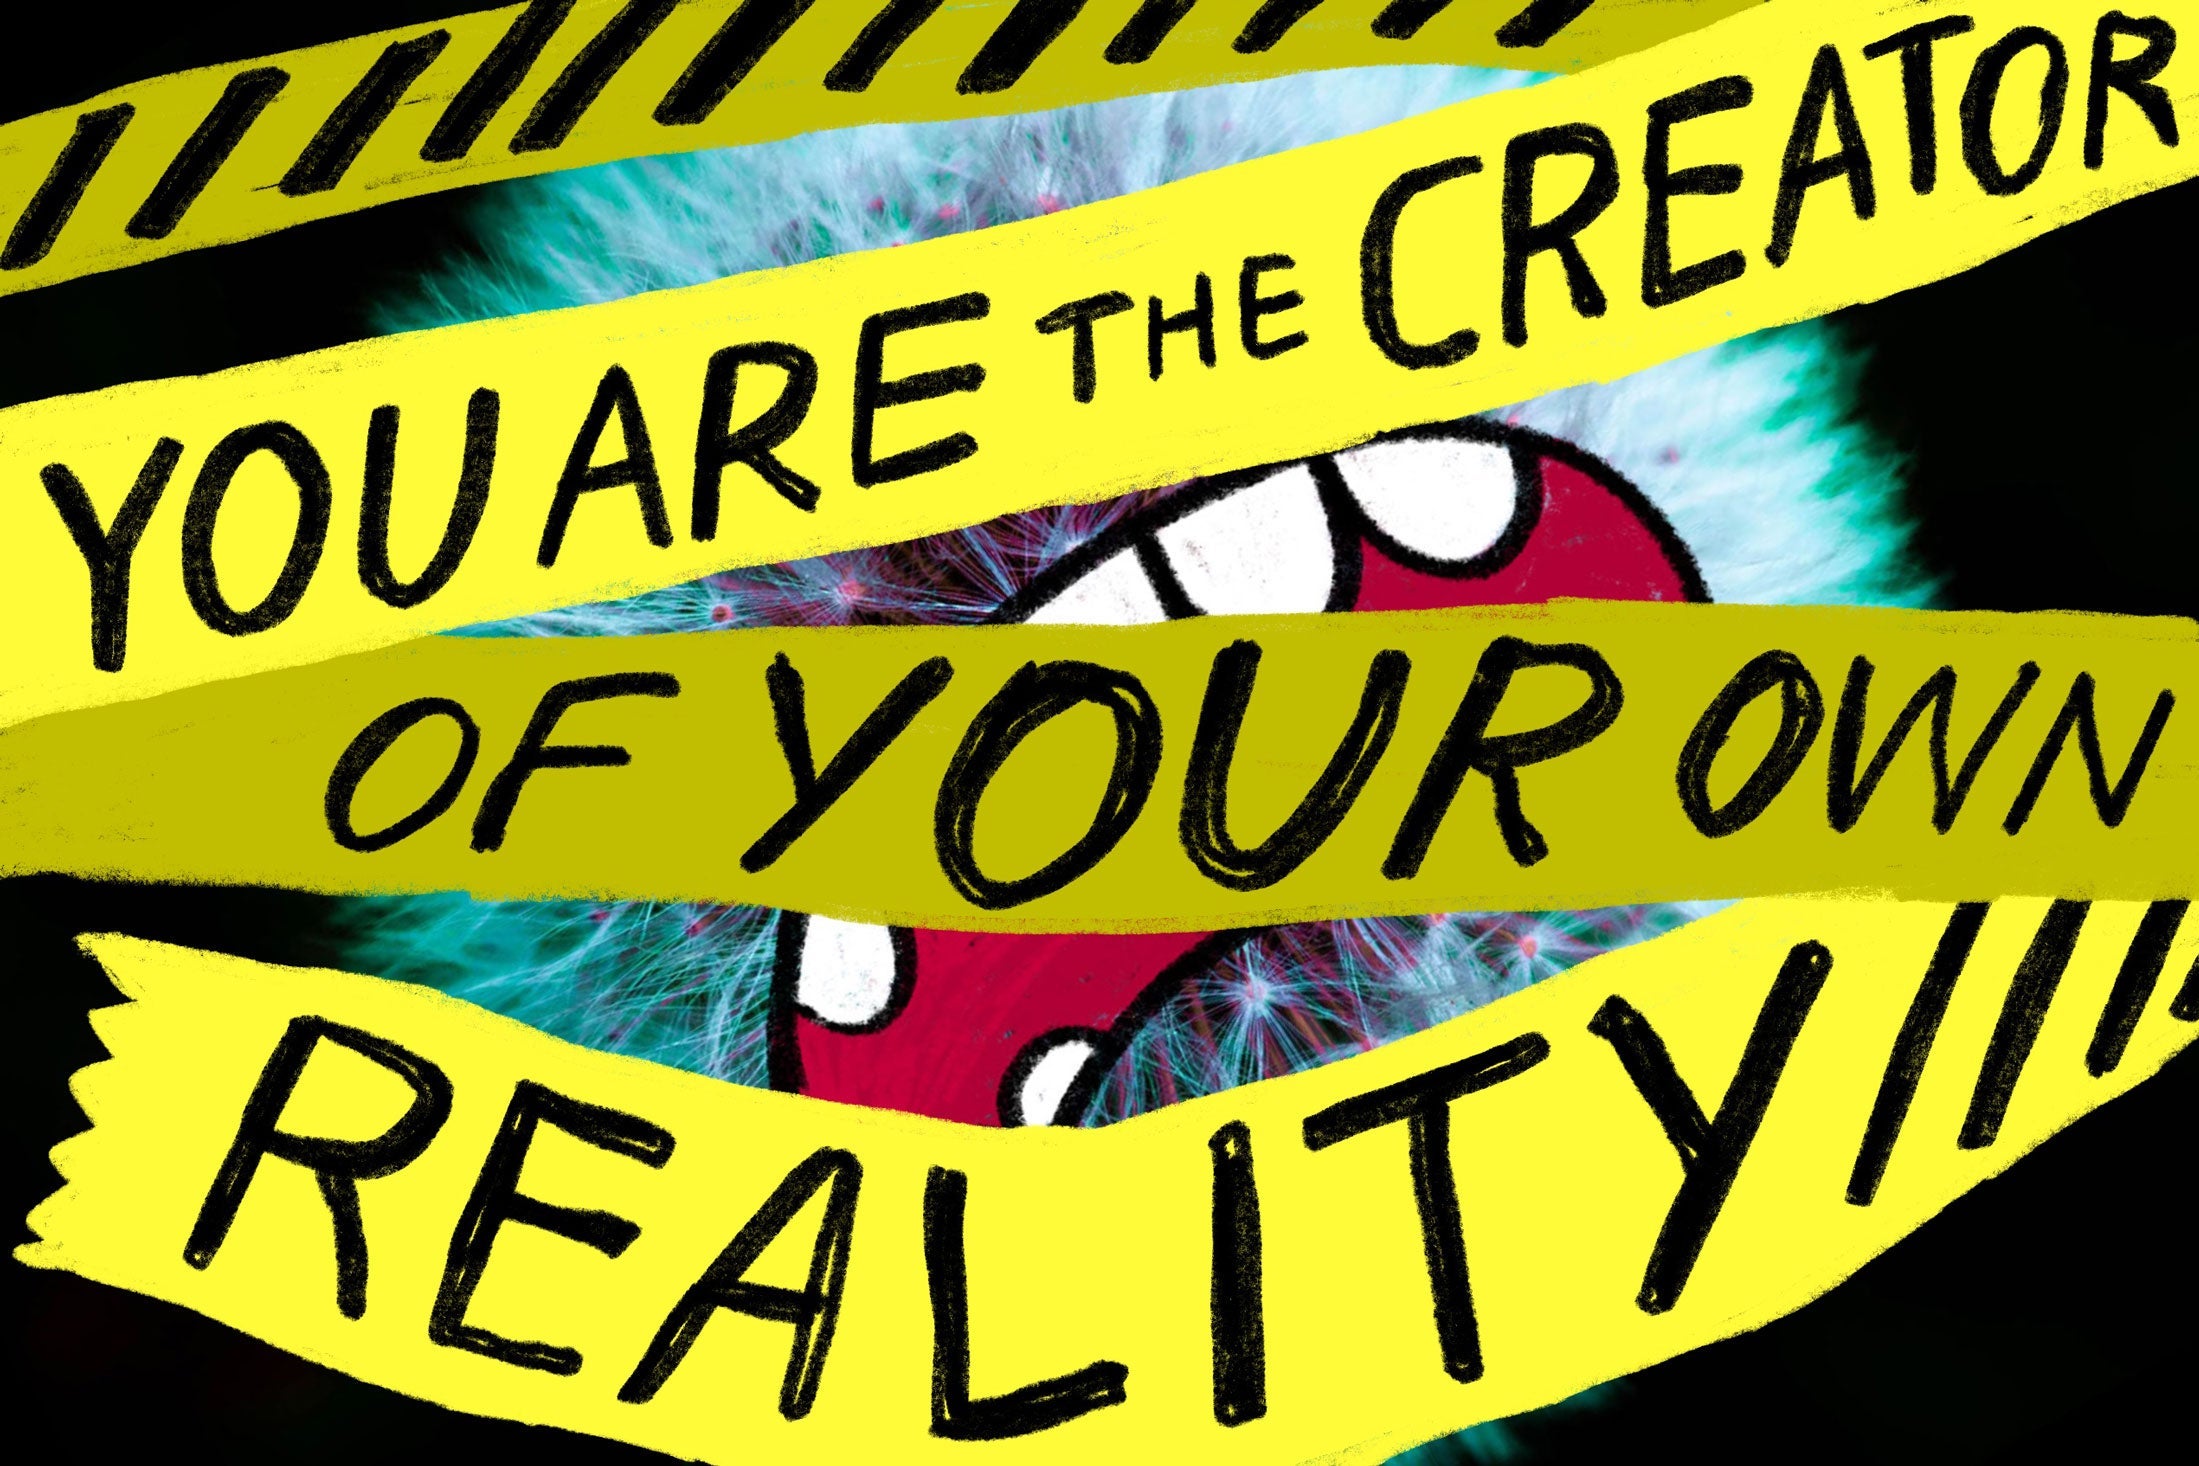 Caution tape reading "You are the creator of your own reality." blocking an irate alien from view.